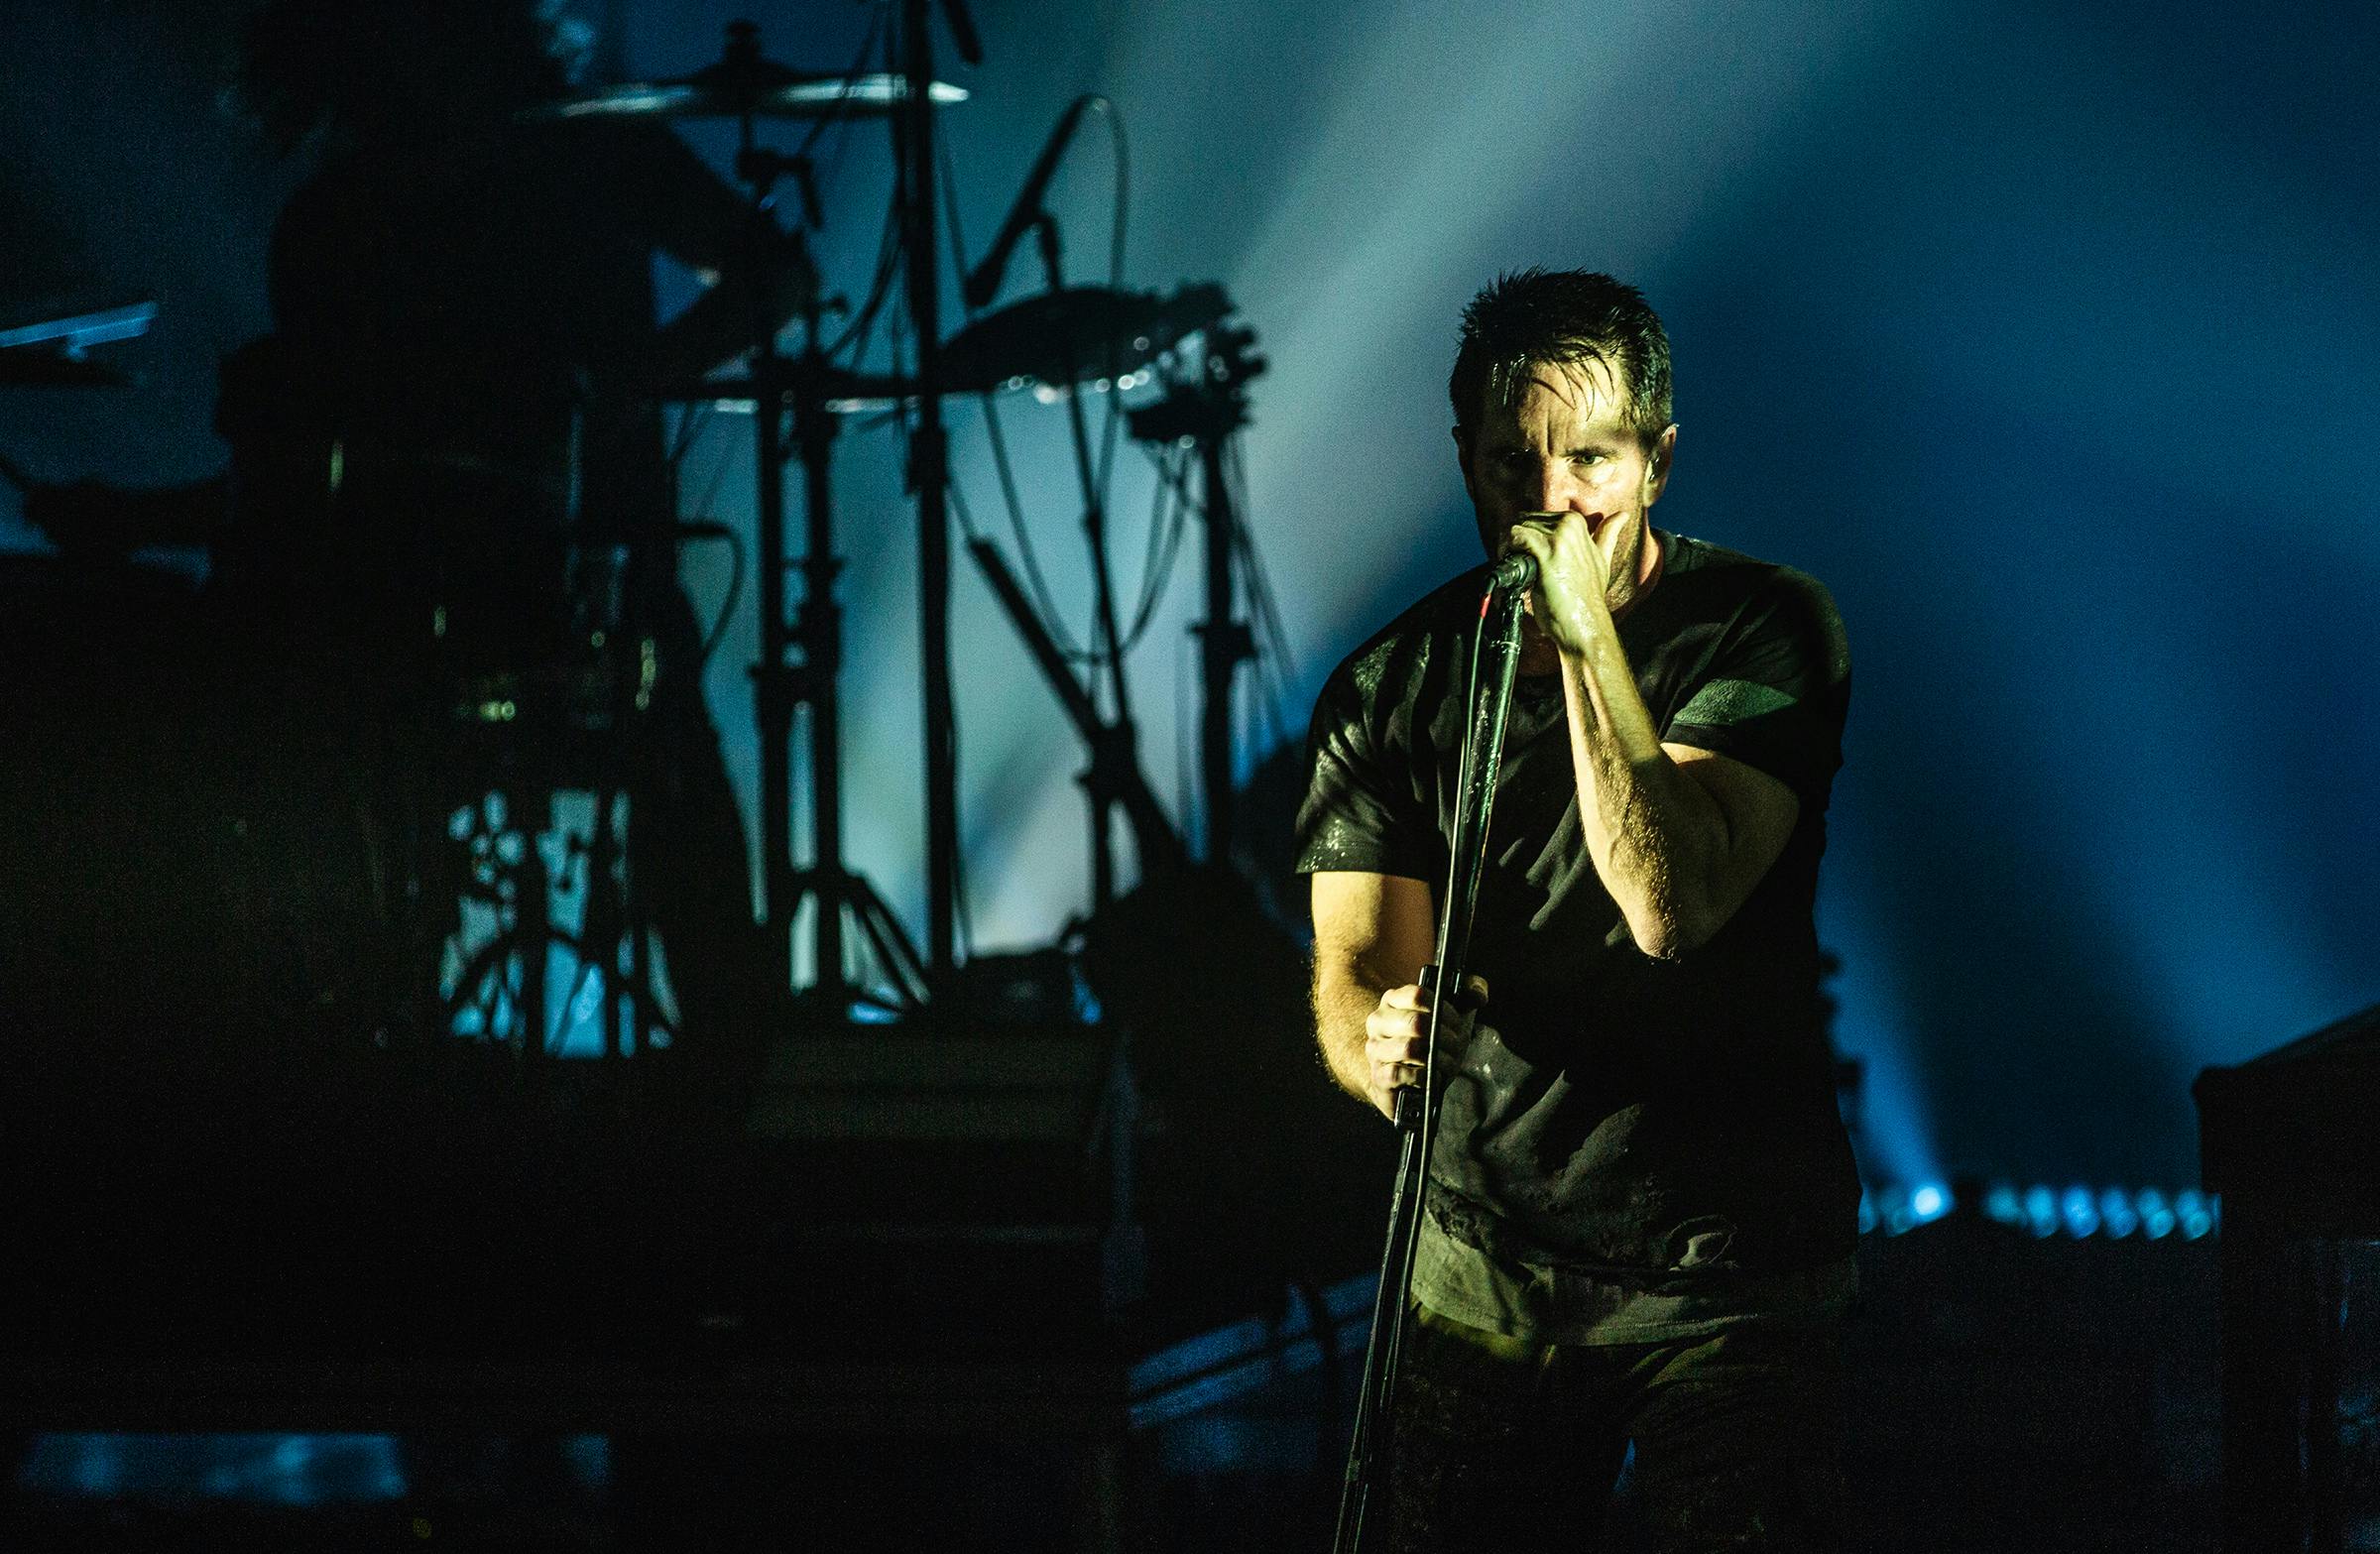 Watch Trent Reznor cover Fashion and Fantastic Voyage during David Bowie tribute stream